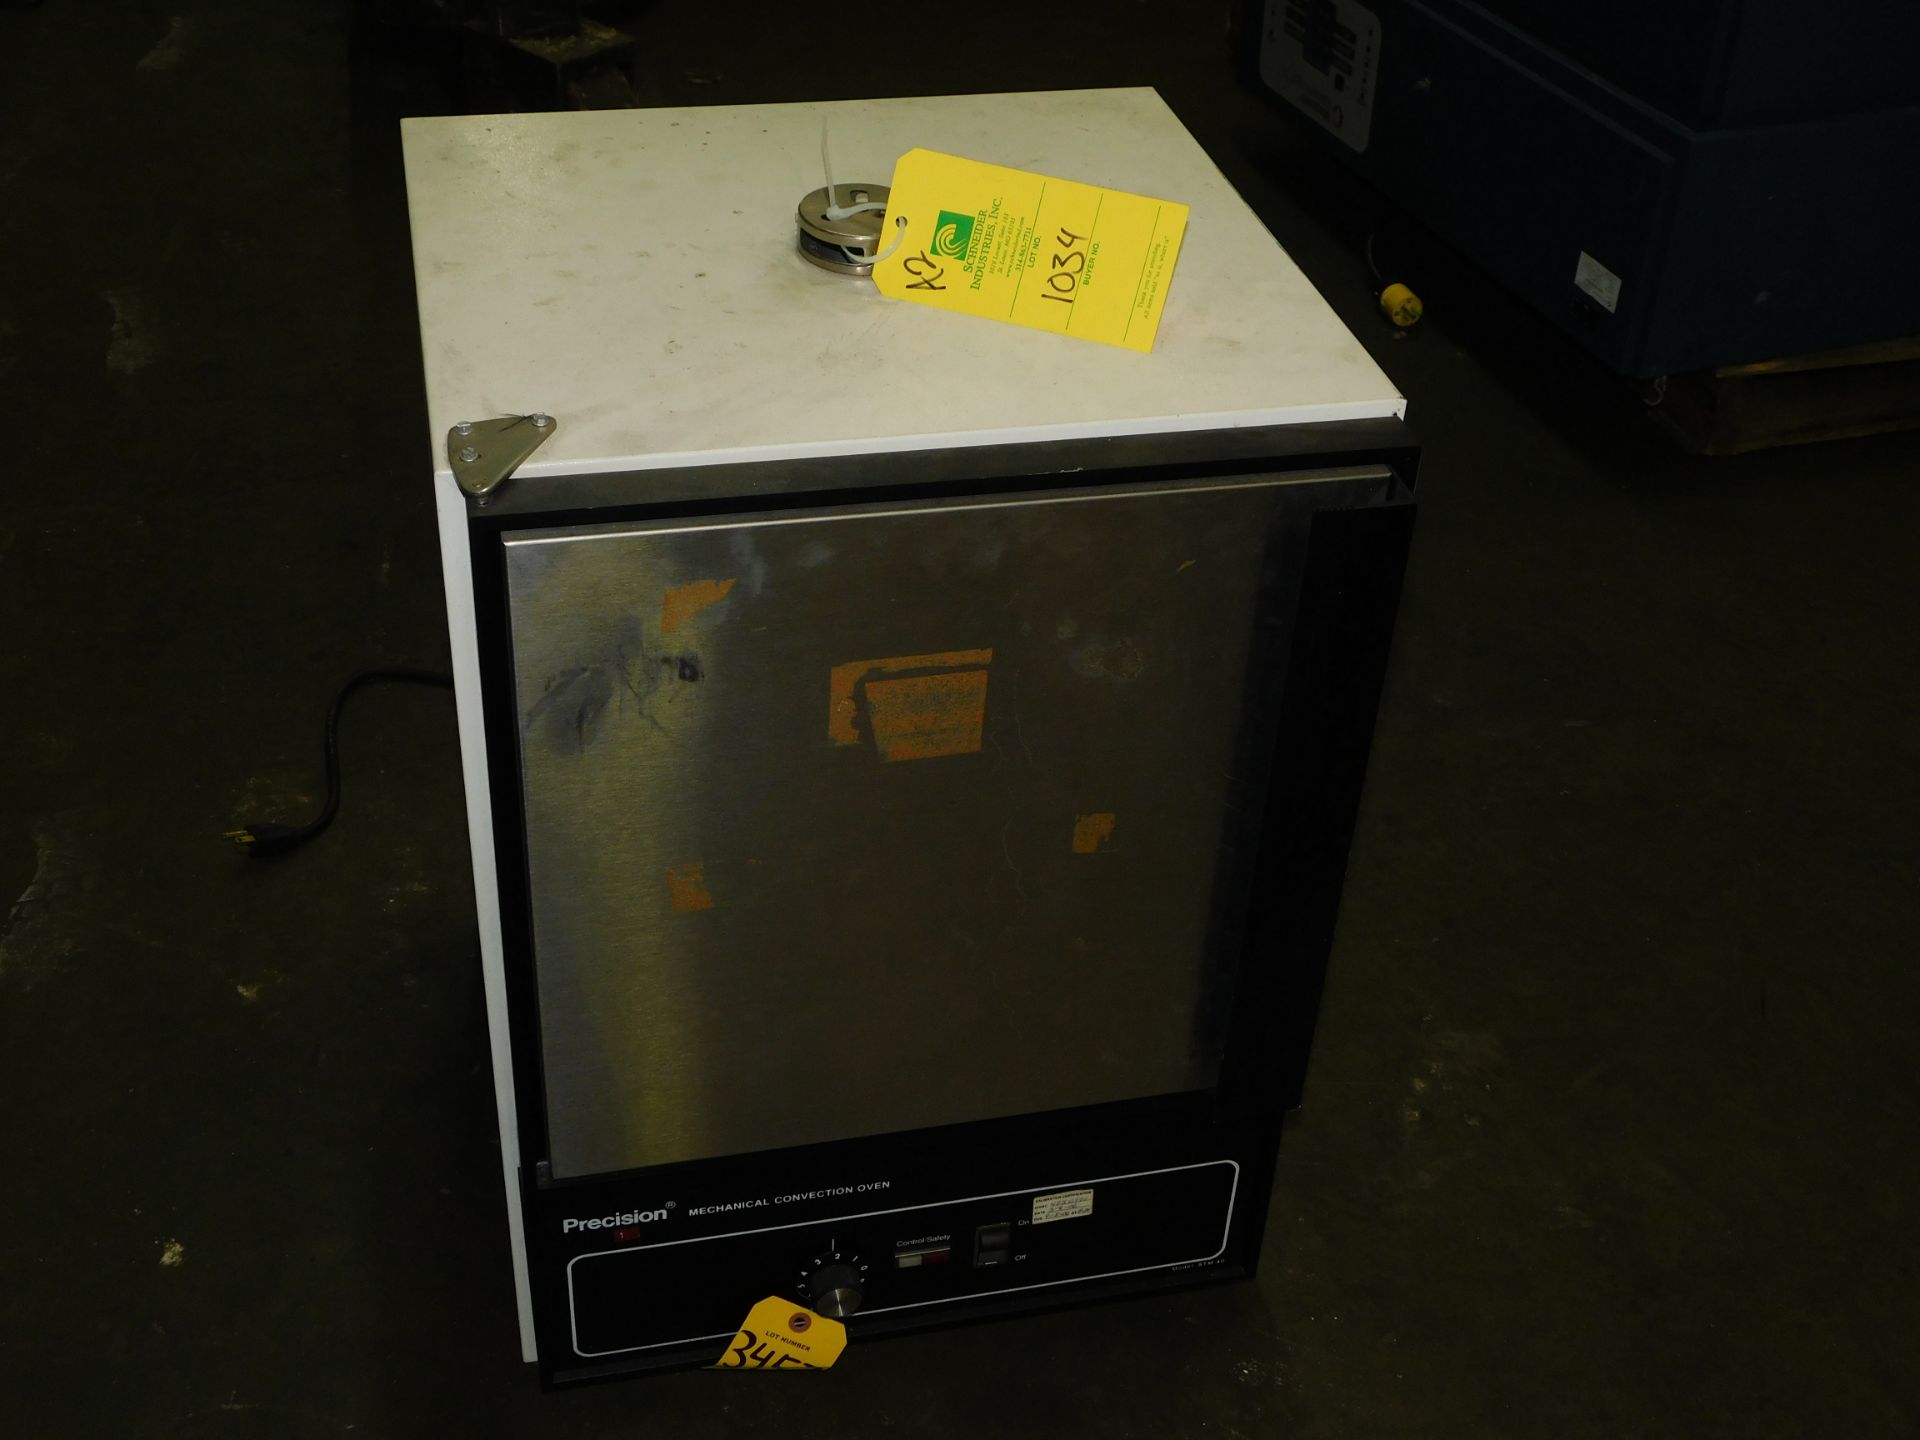 Precision Mechanical Convection Oven (Testing Equipment), Model STM40, Mechanical convection ovens